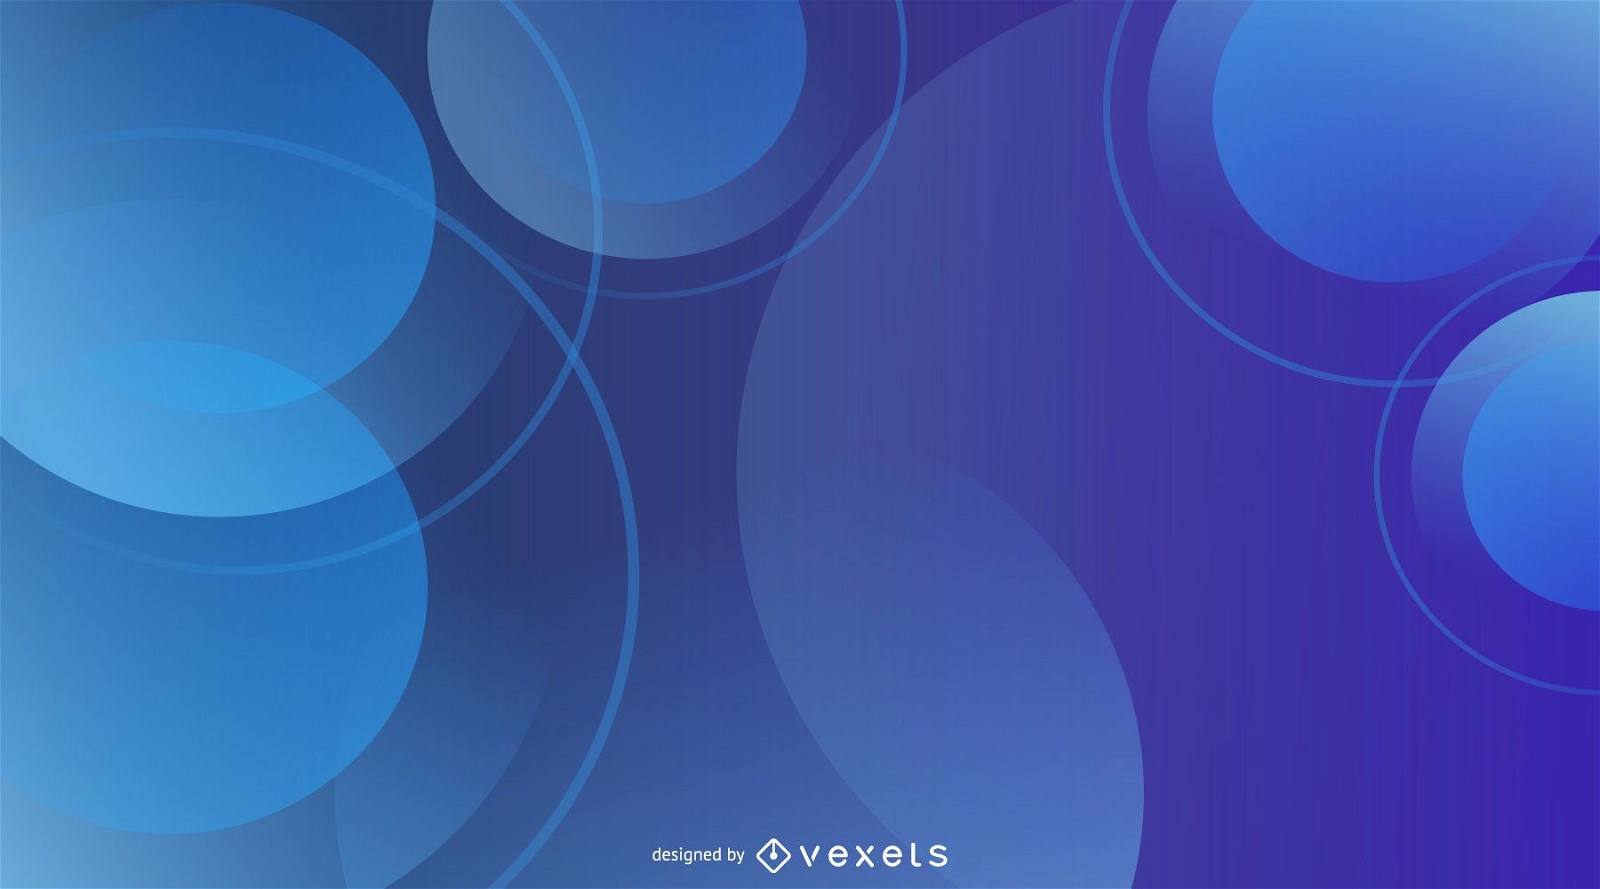 Blue Circular Patterned Background